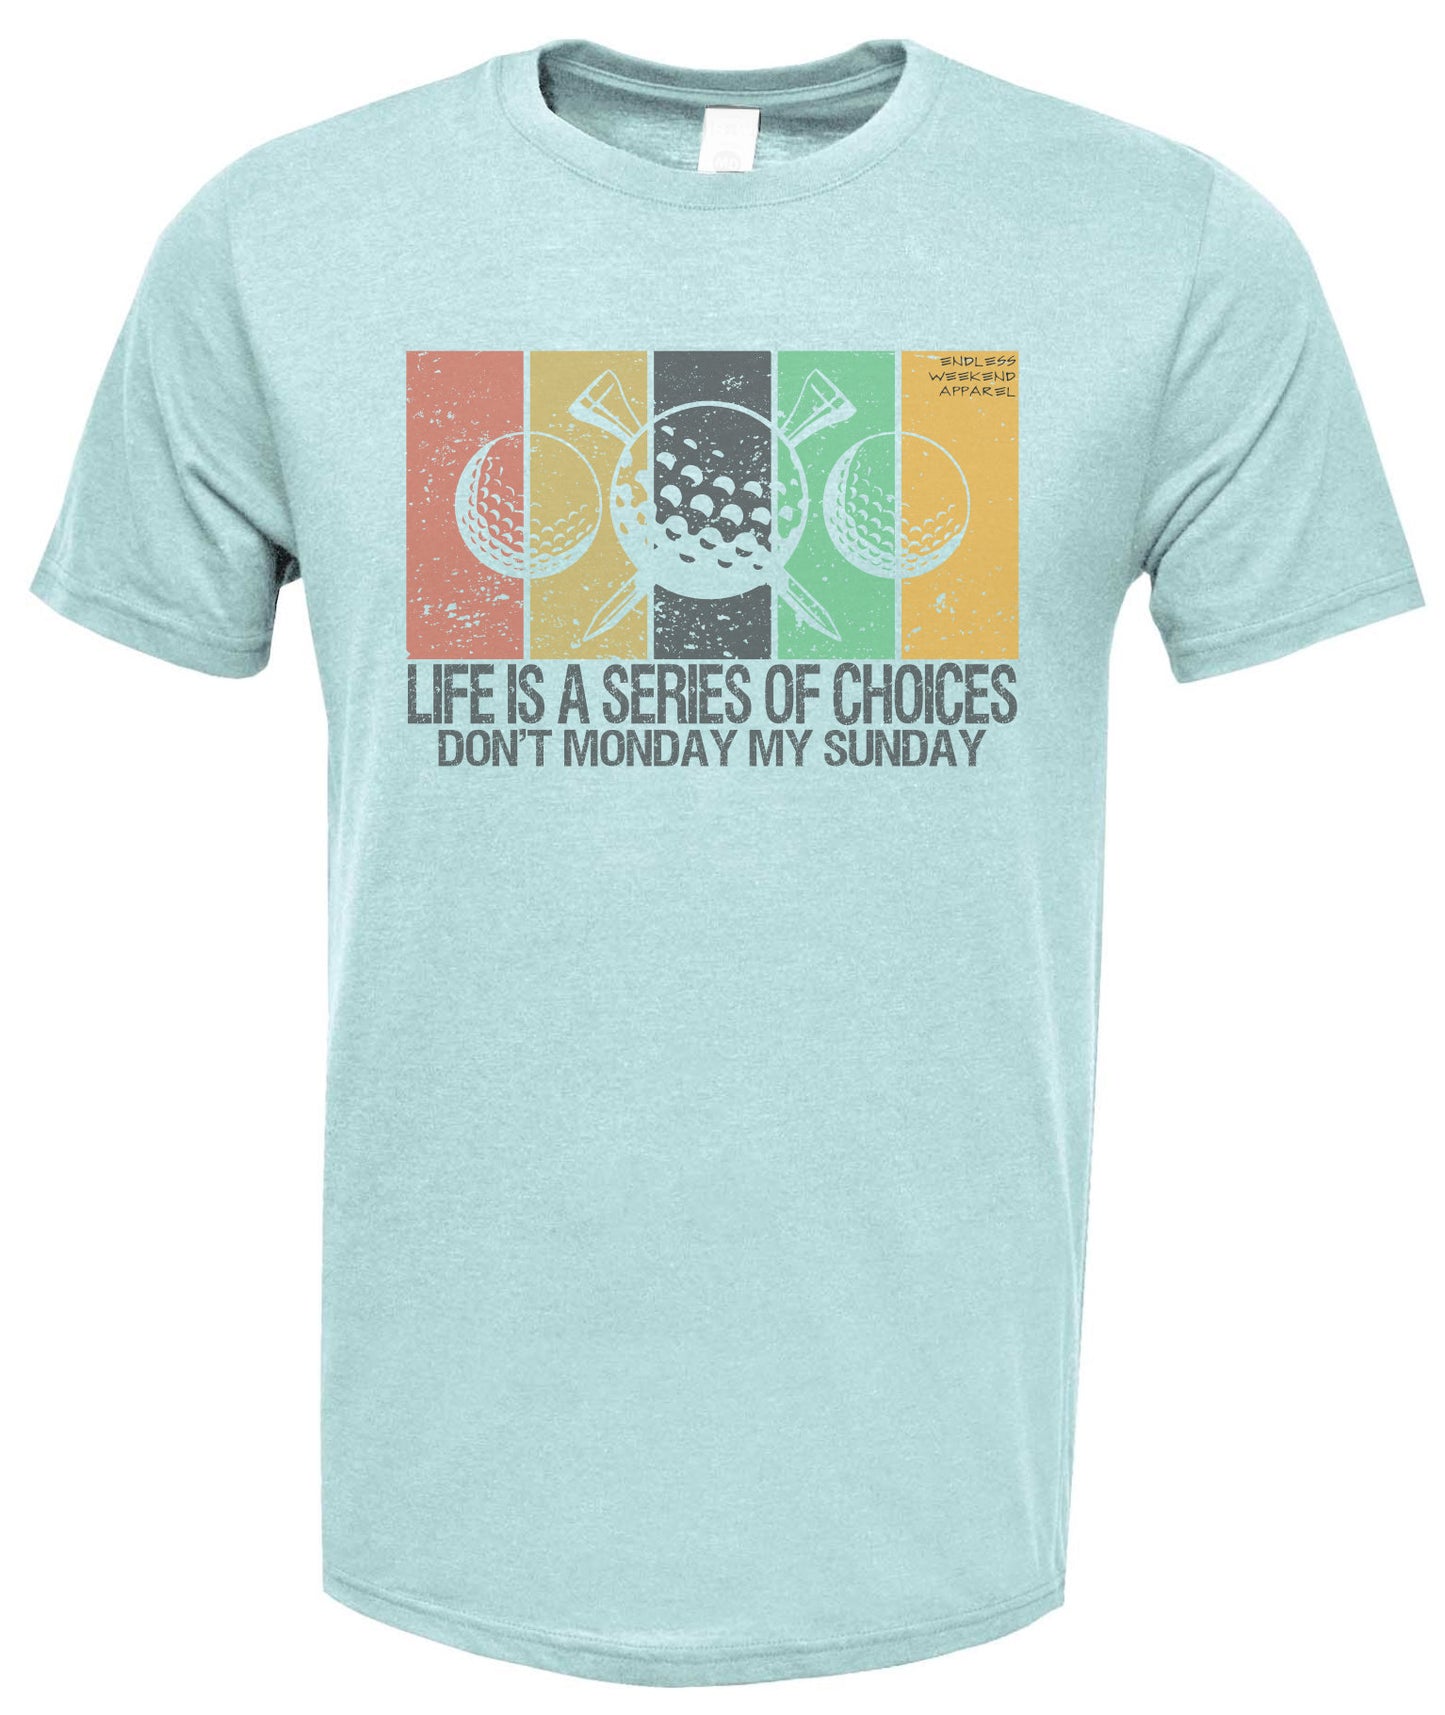 LIFE IS A SERIES OF CHOICES GOLF SHIRT